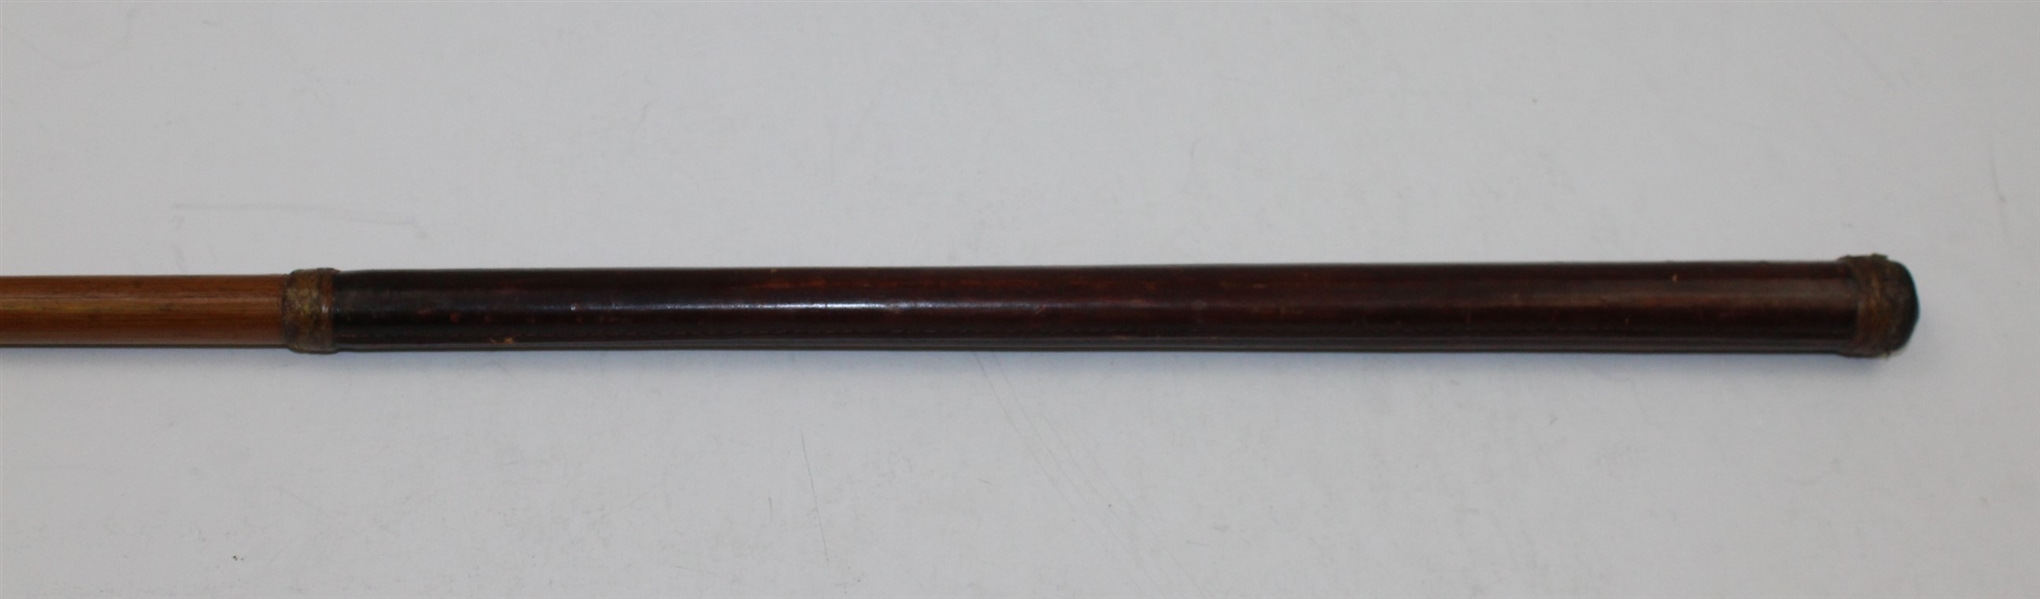 Mashie Iron-Recorder-ROTH COLLECTION